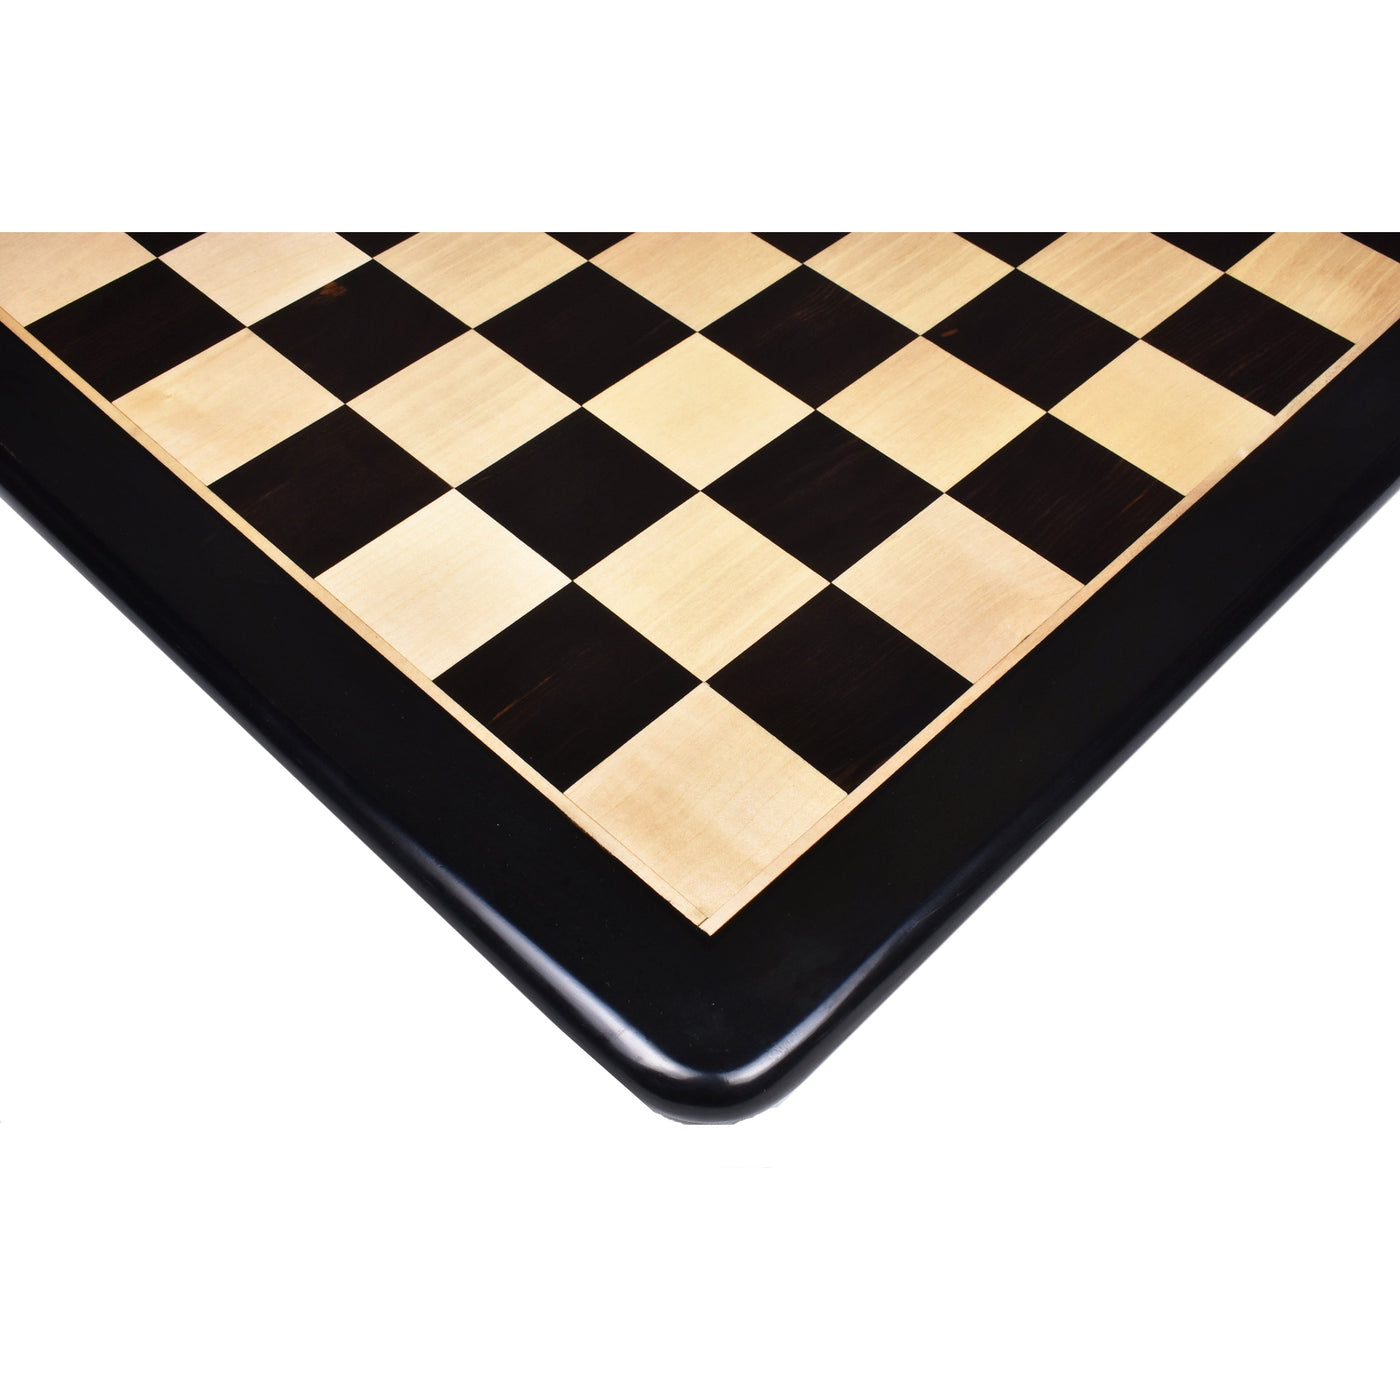 Combo of 3.9" Exclusive Alban Staunton Chess Set - Pieces in Ebony Wood with Board and Box